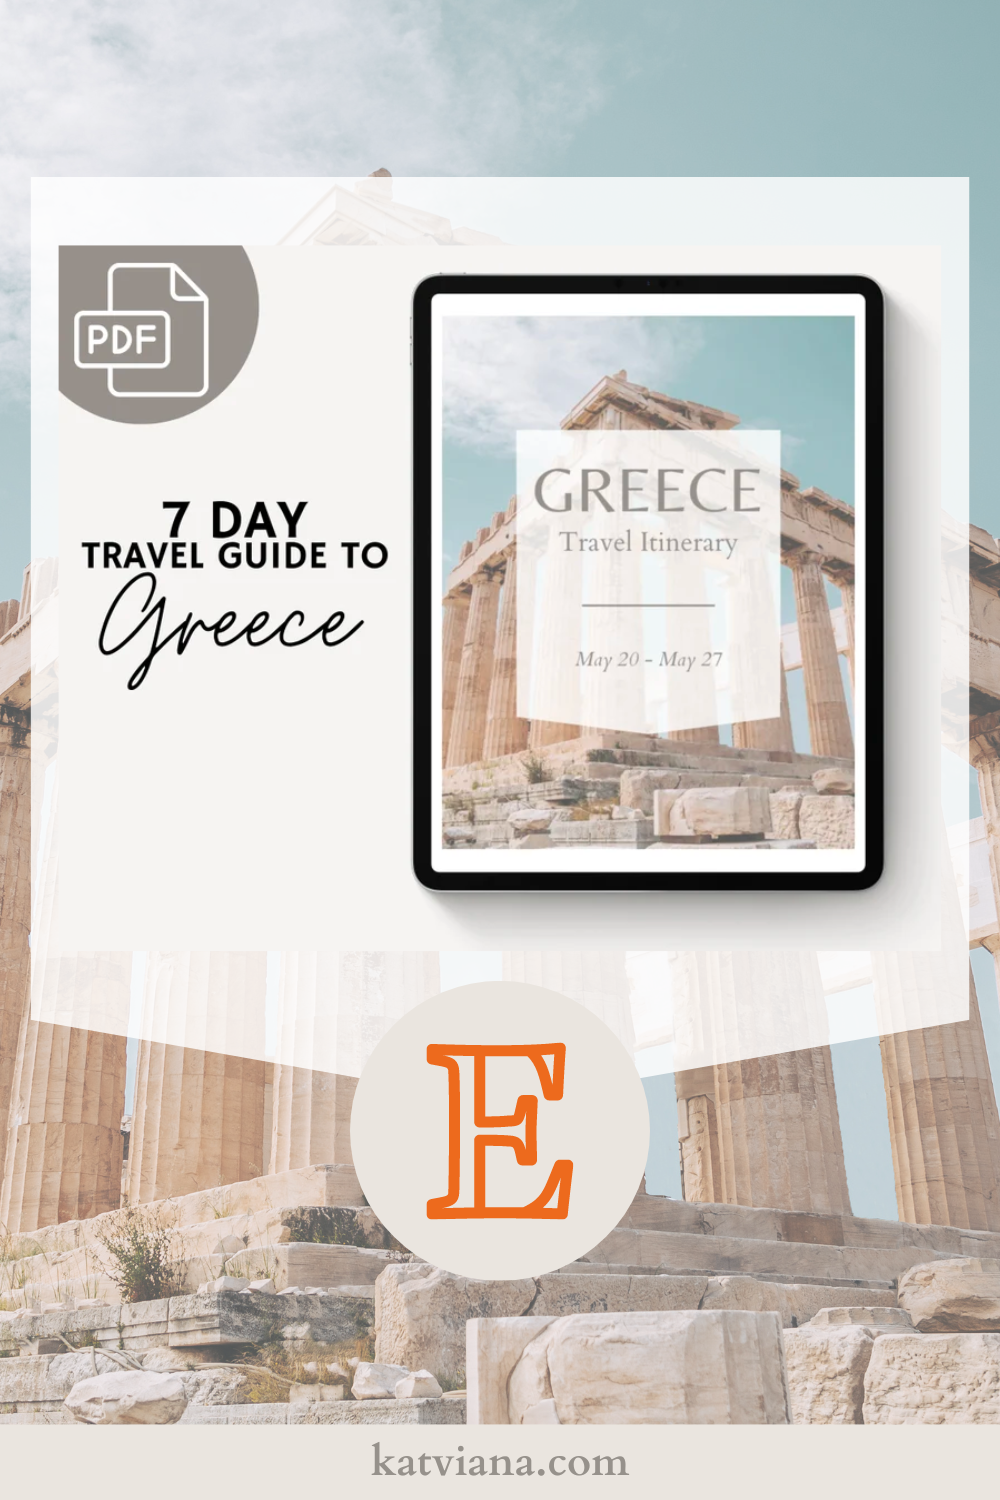 Greece 1 Week Itinerary - downloadable travel guide